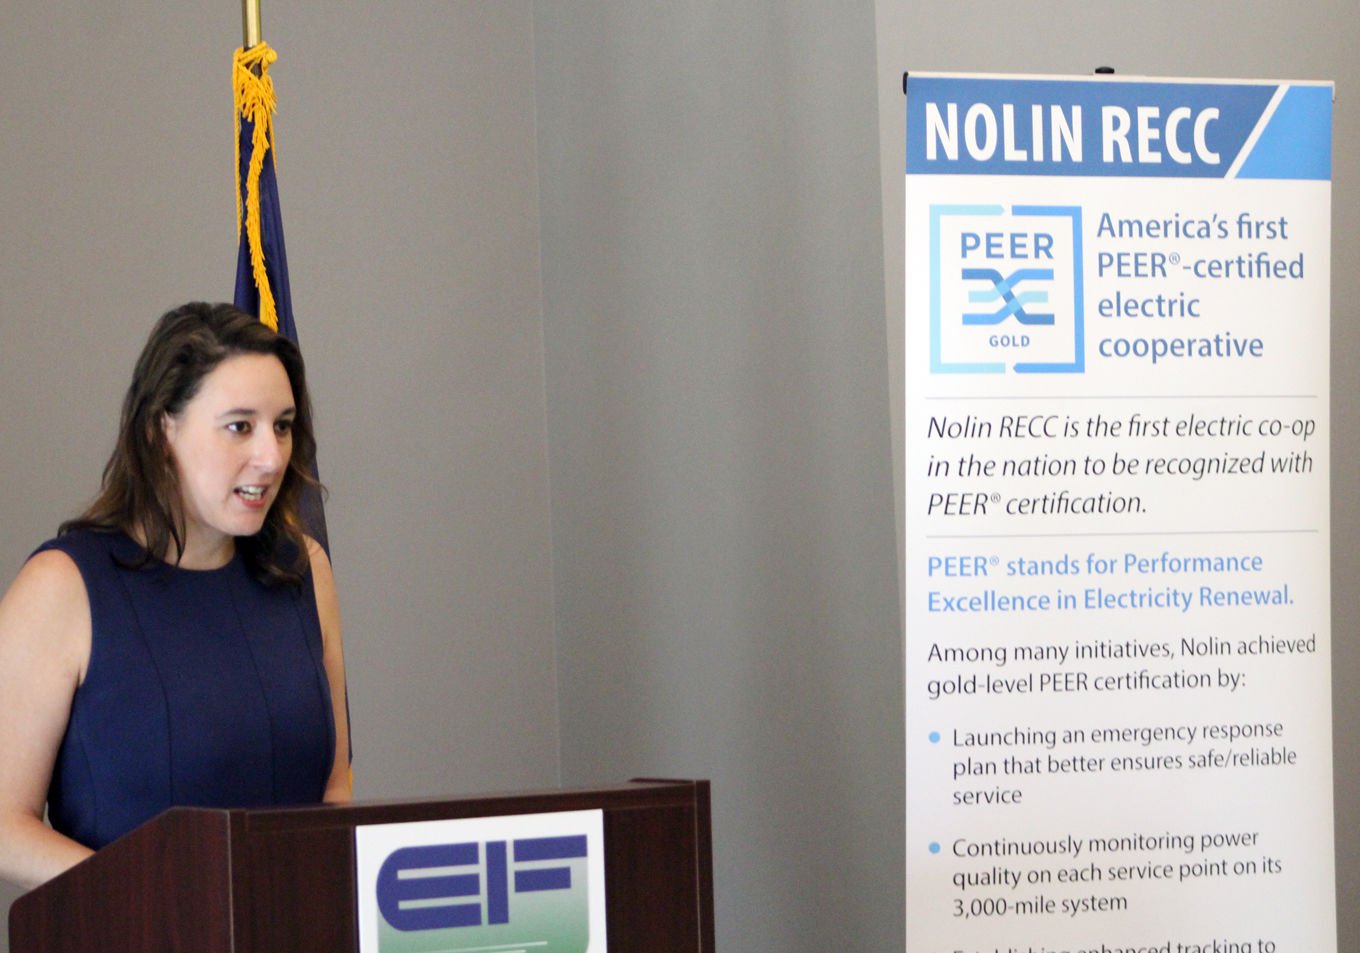 Nolin RECC Praised For Its Energy Practices Local News 